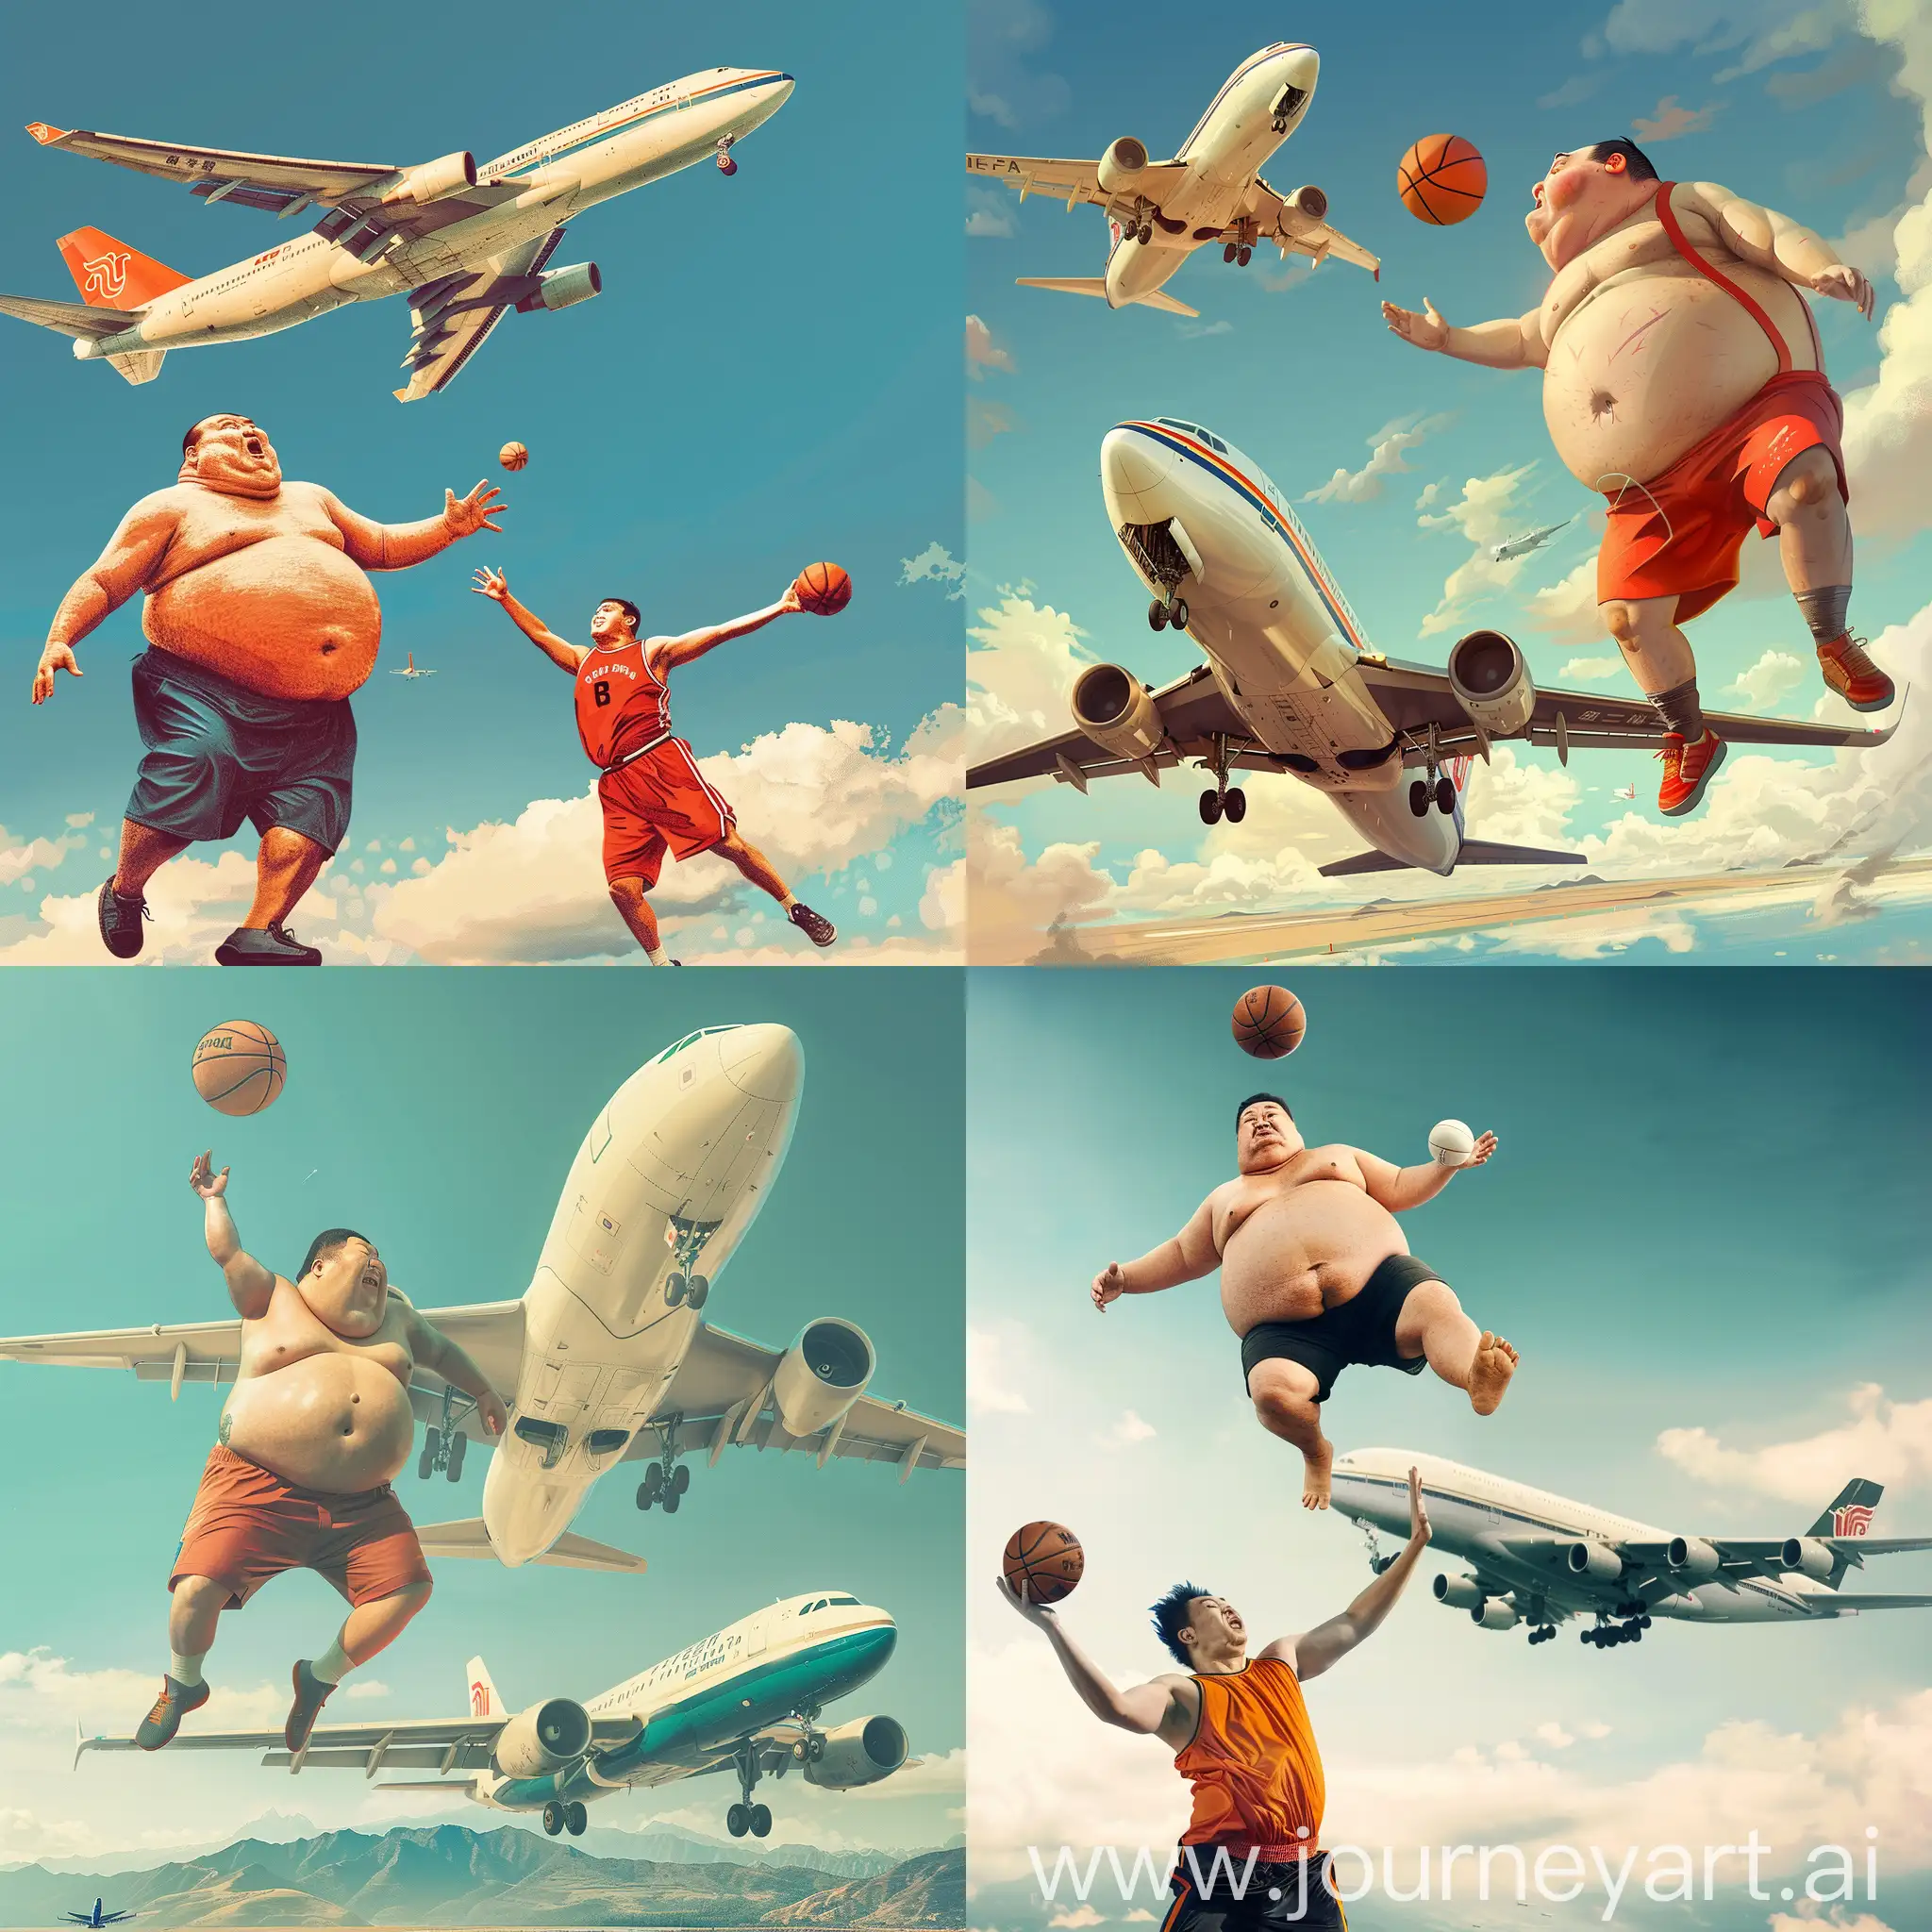 A Chinese fat man is flying over an aeroplane and shoots the ball on the basketball.